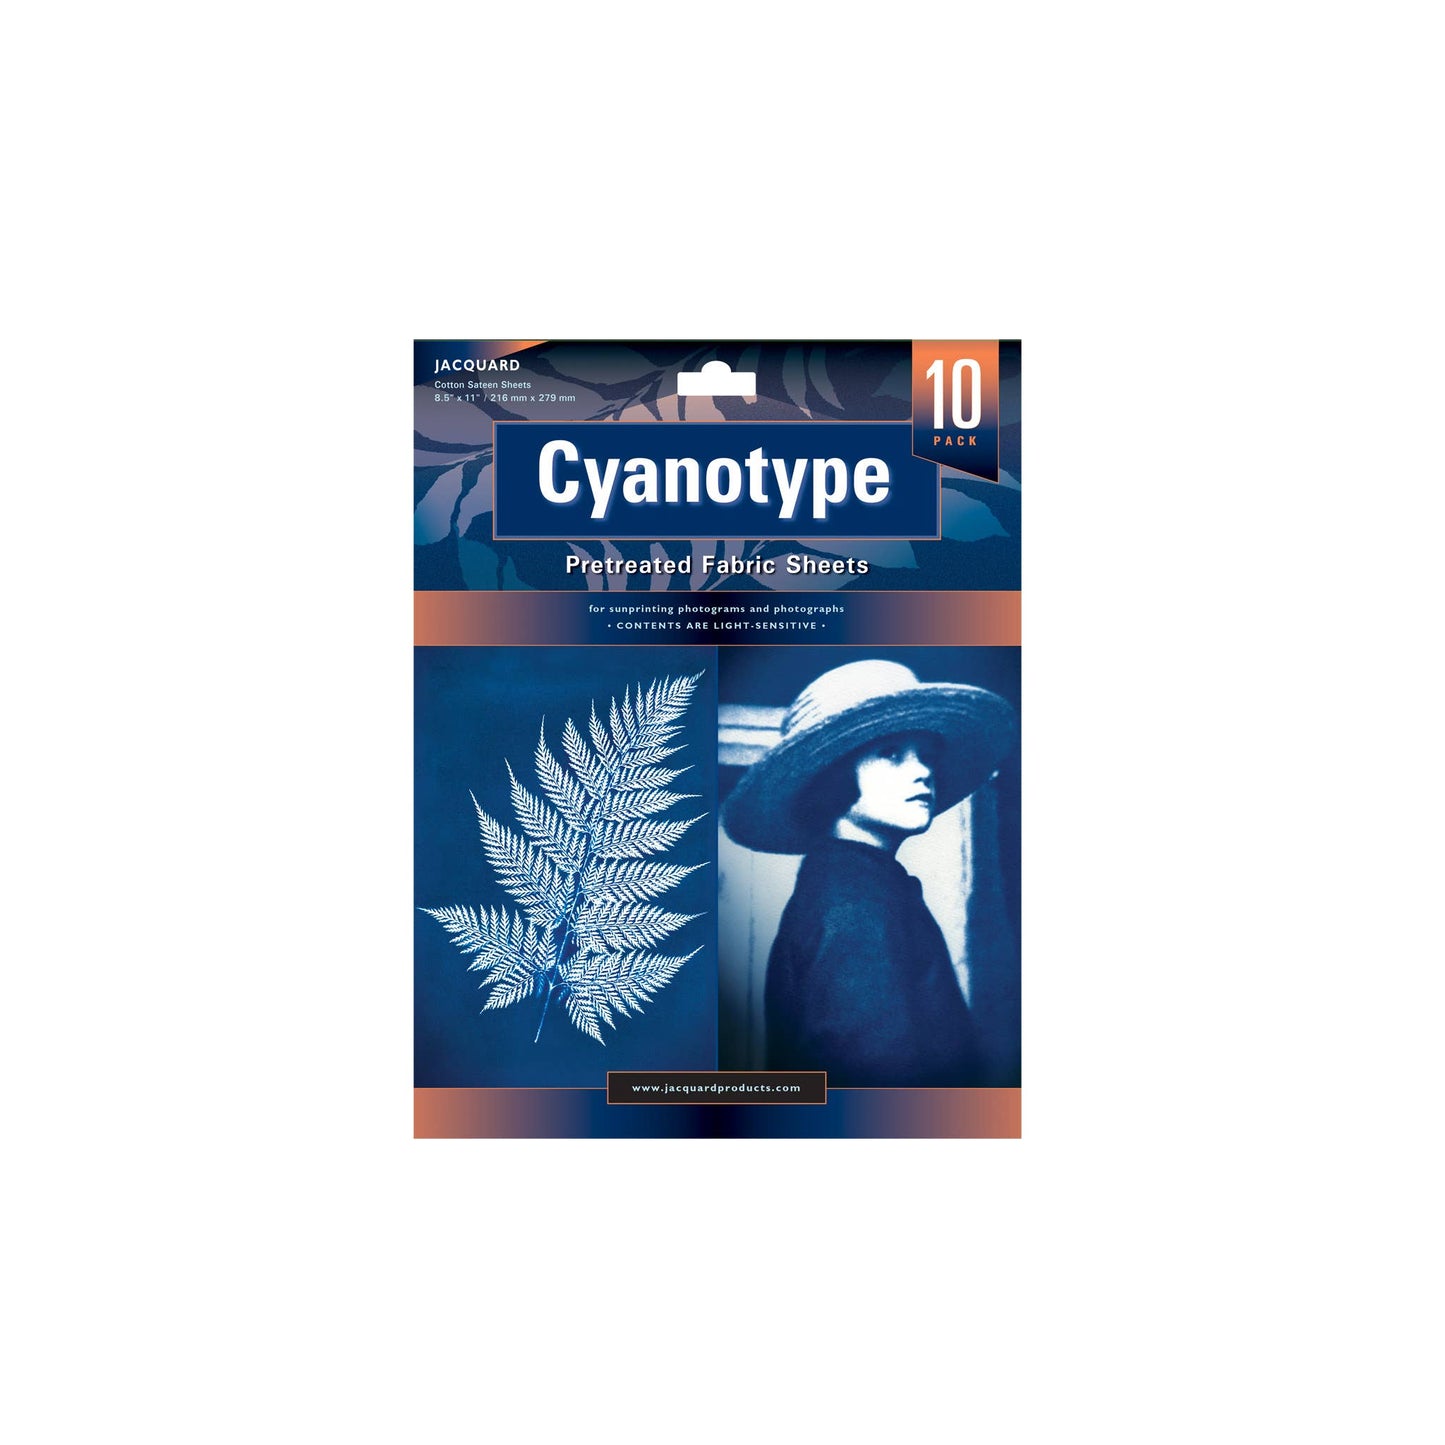 Jacquard Products - Cyanotype Fabric Sheets -  10-Pack